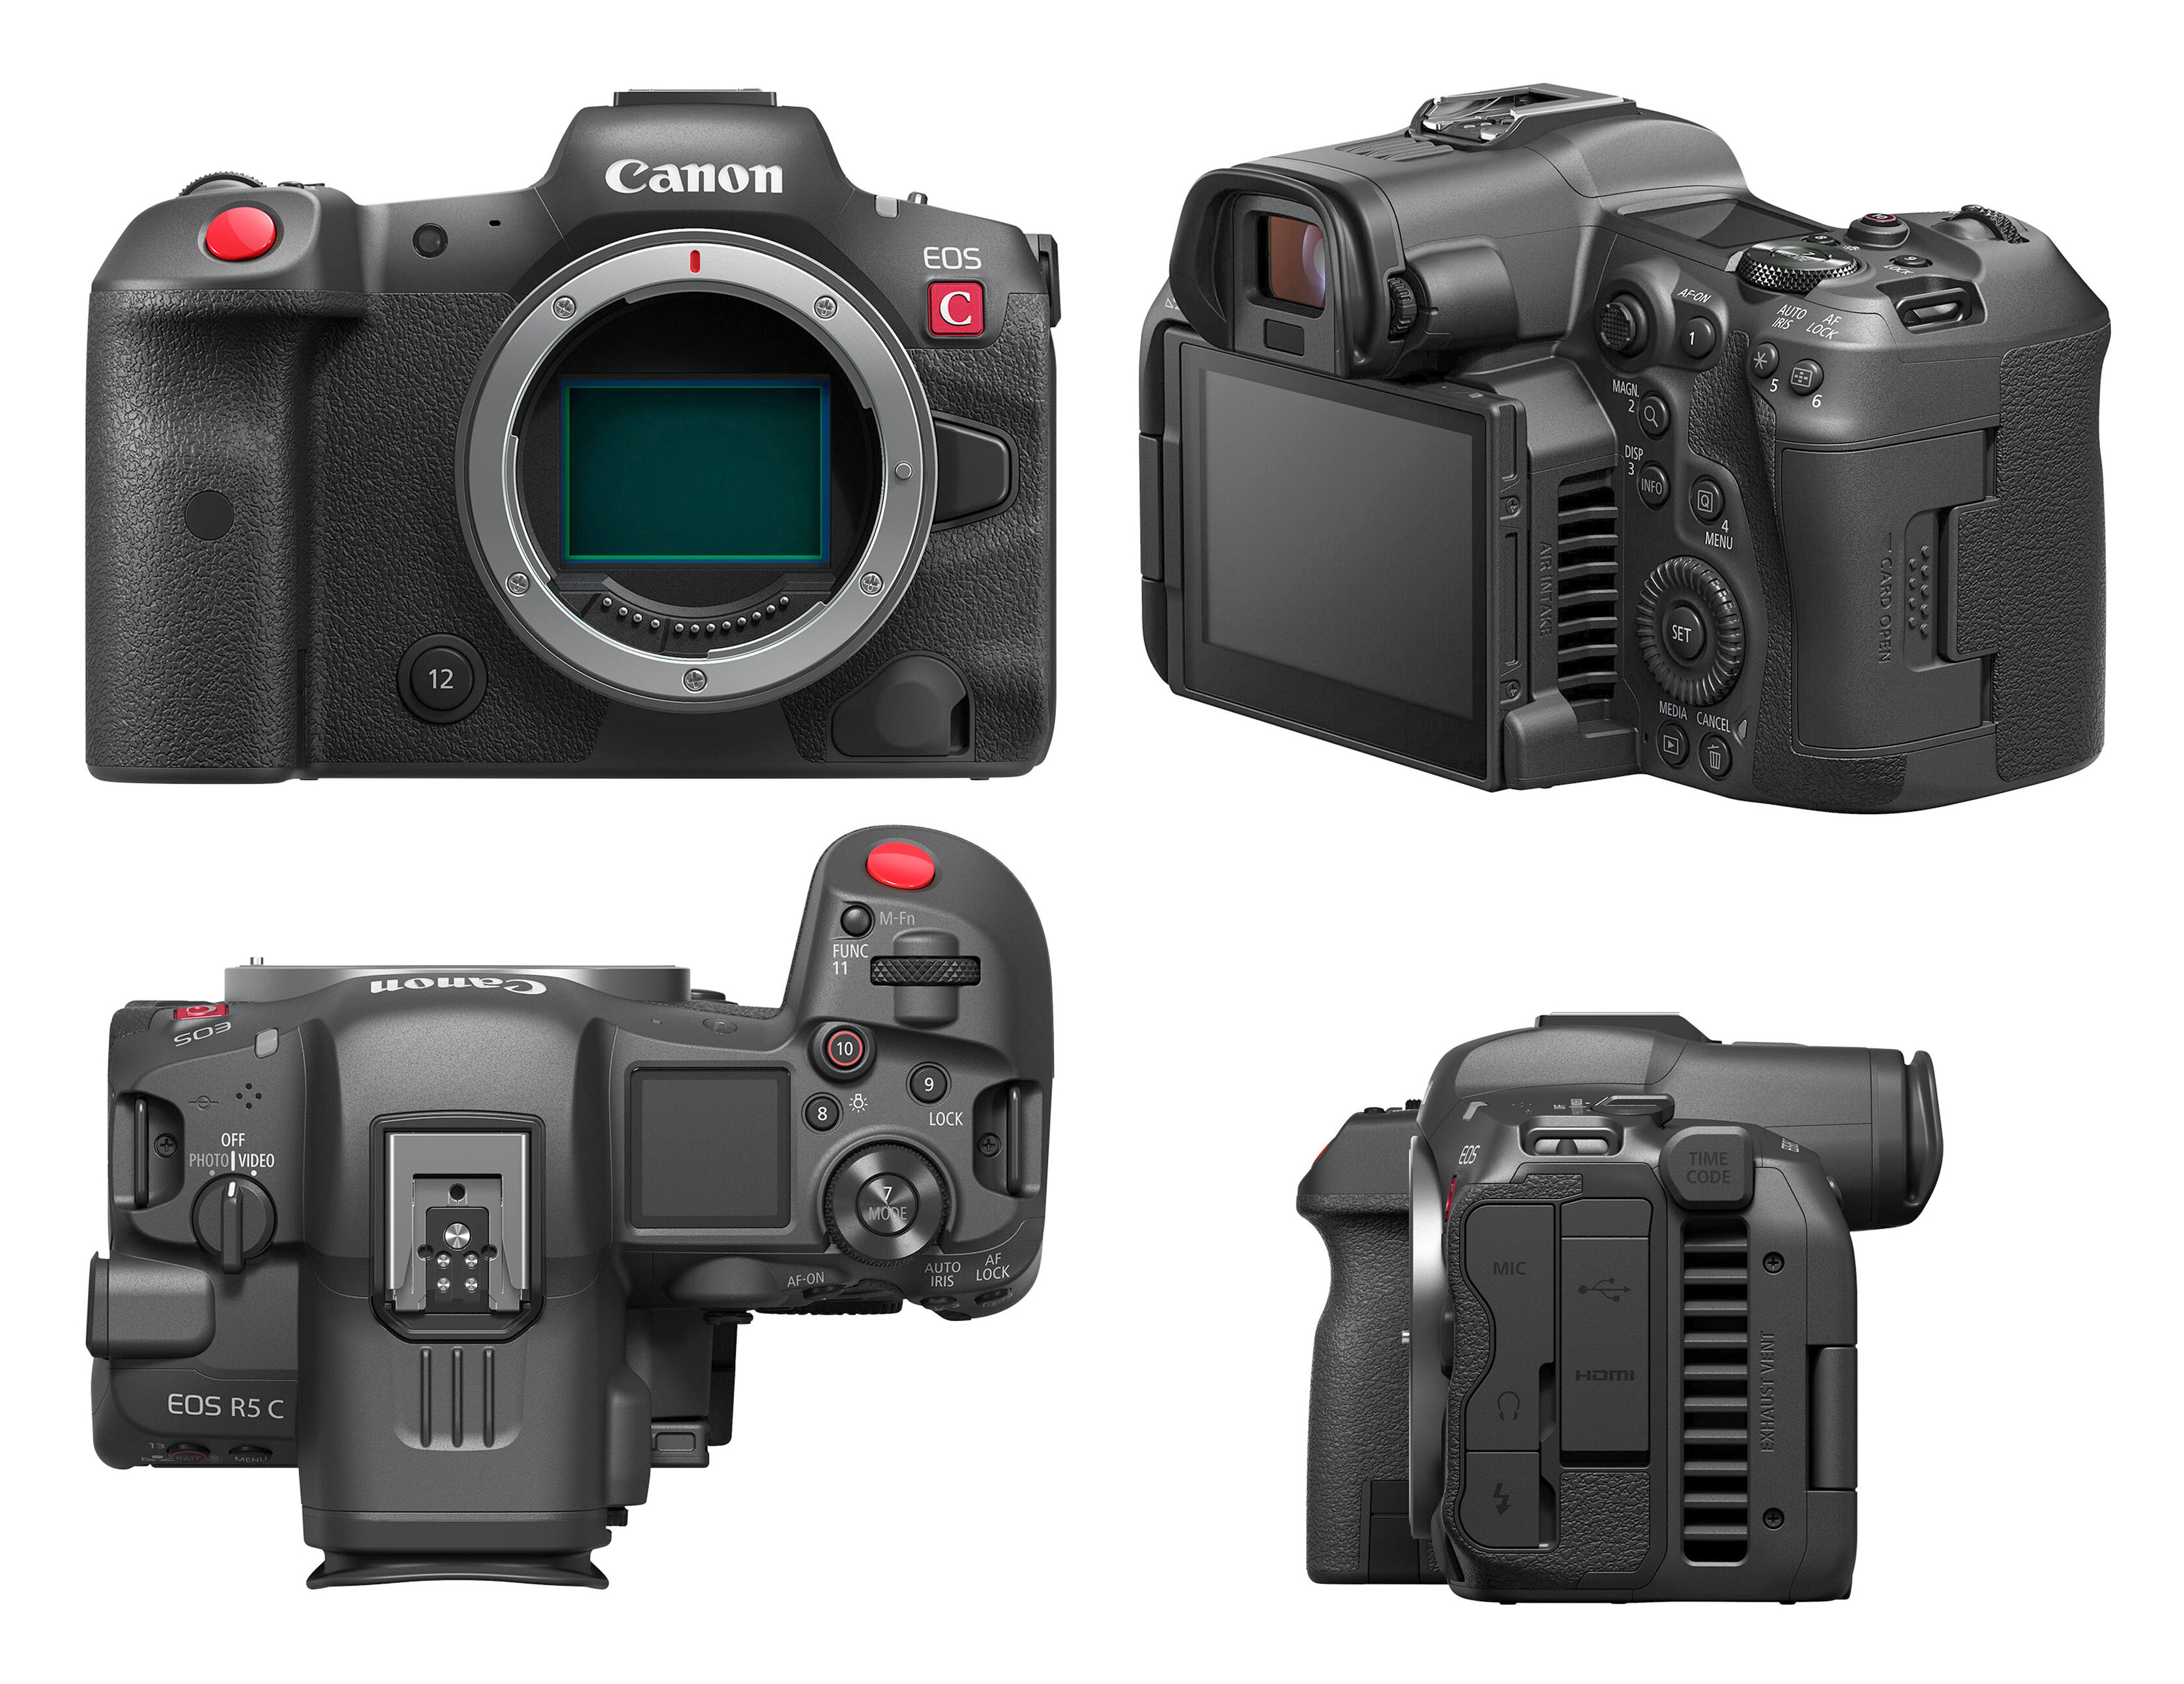 EOS R5Cproduct